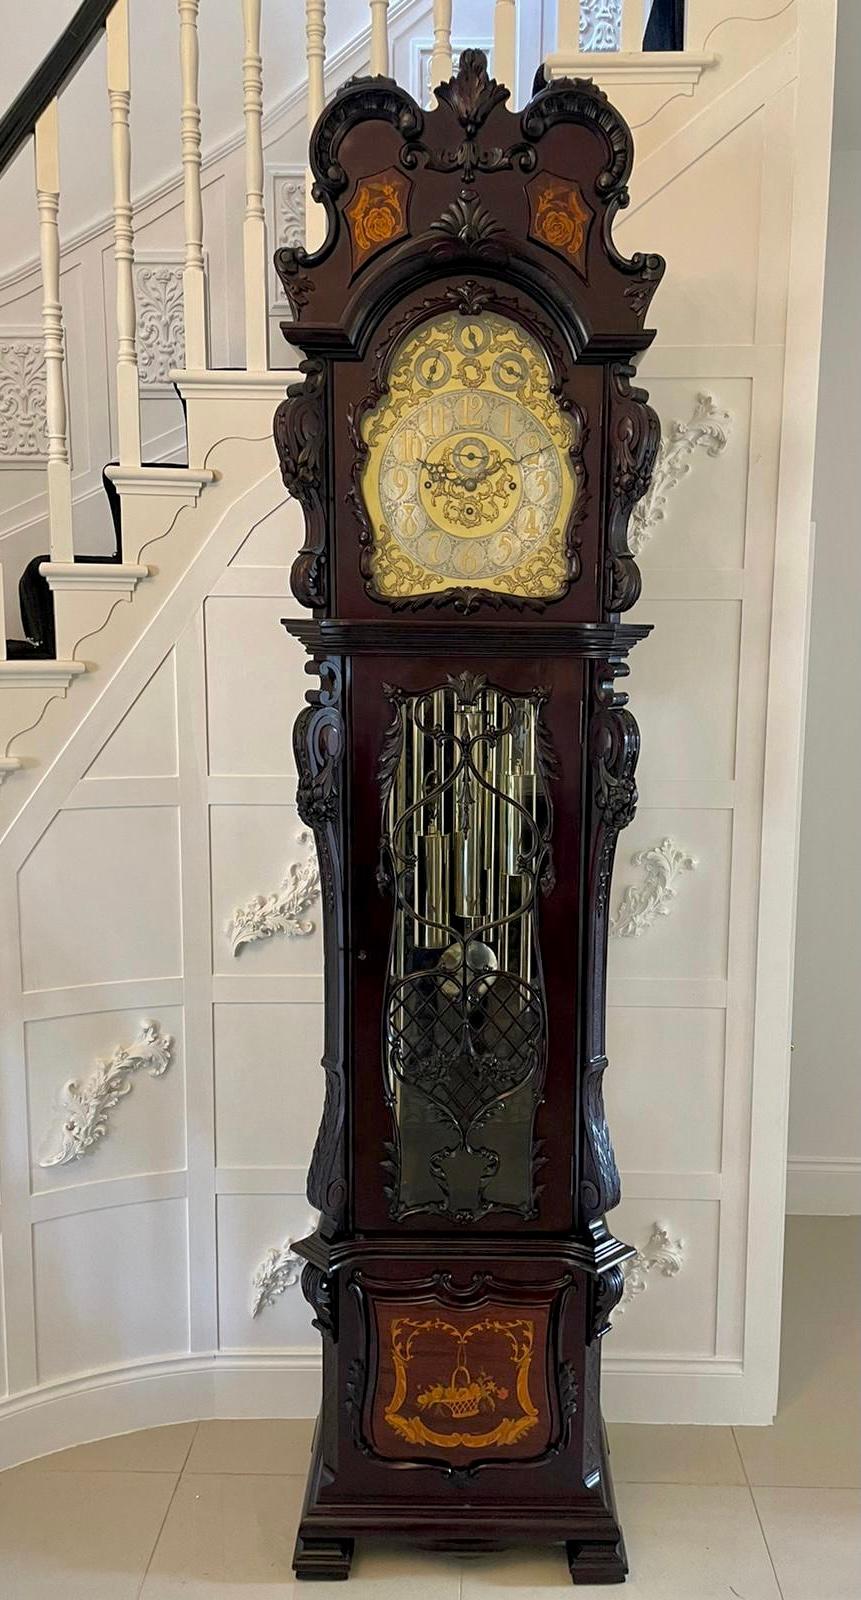 Extremely large exhibition quality antique Victorian carved mahogany and marquetry tubular chiming long case clock having an impressive carved mahogany and marquetry inlaid case with fantastic carved pierced fretwork to the glass door, 14 inch